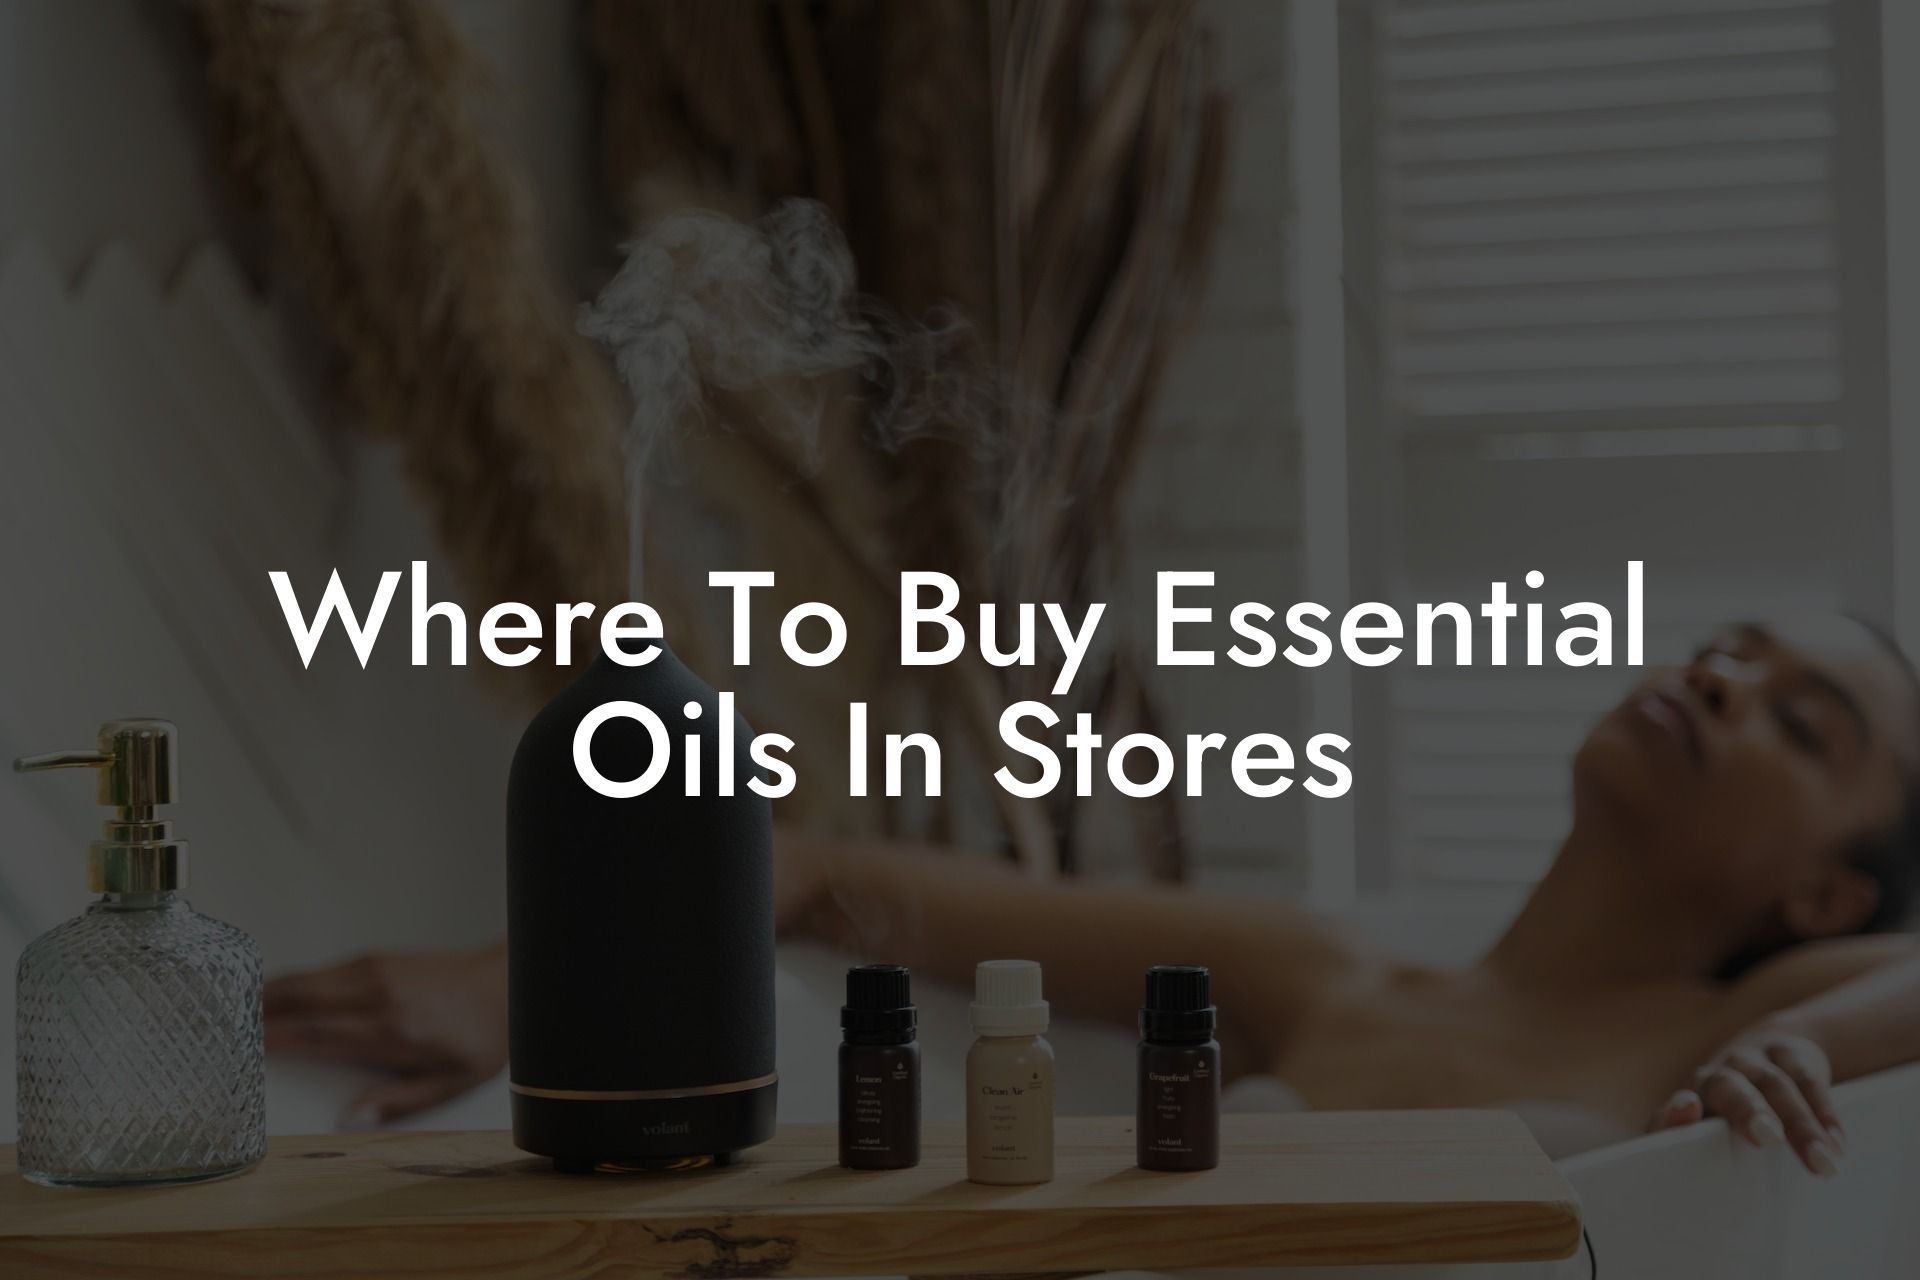 Where To Buy Essential Oils In Stores